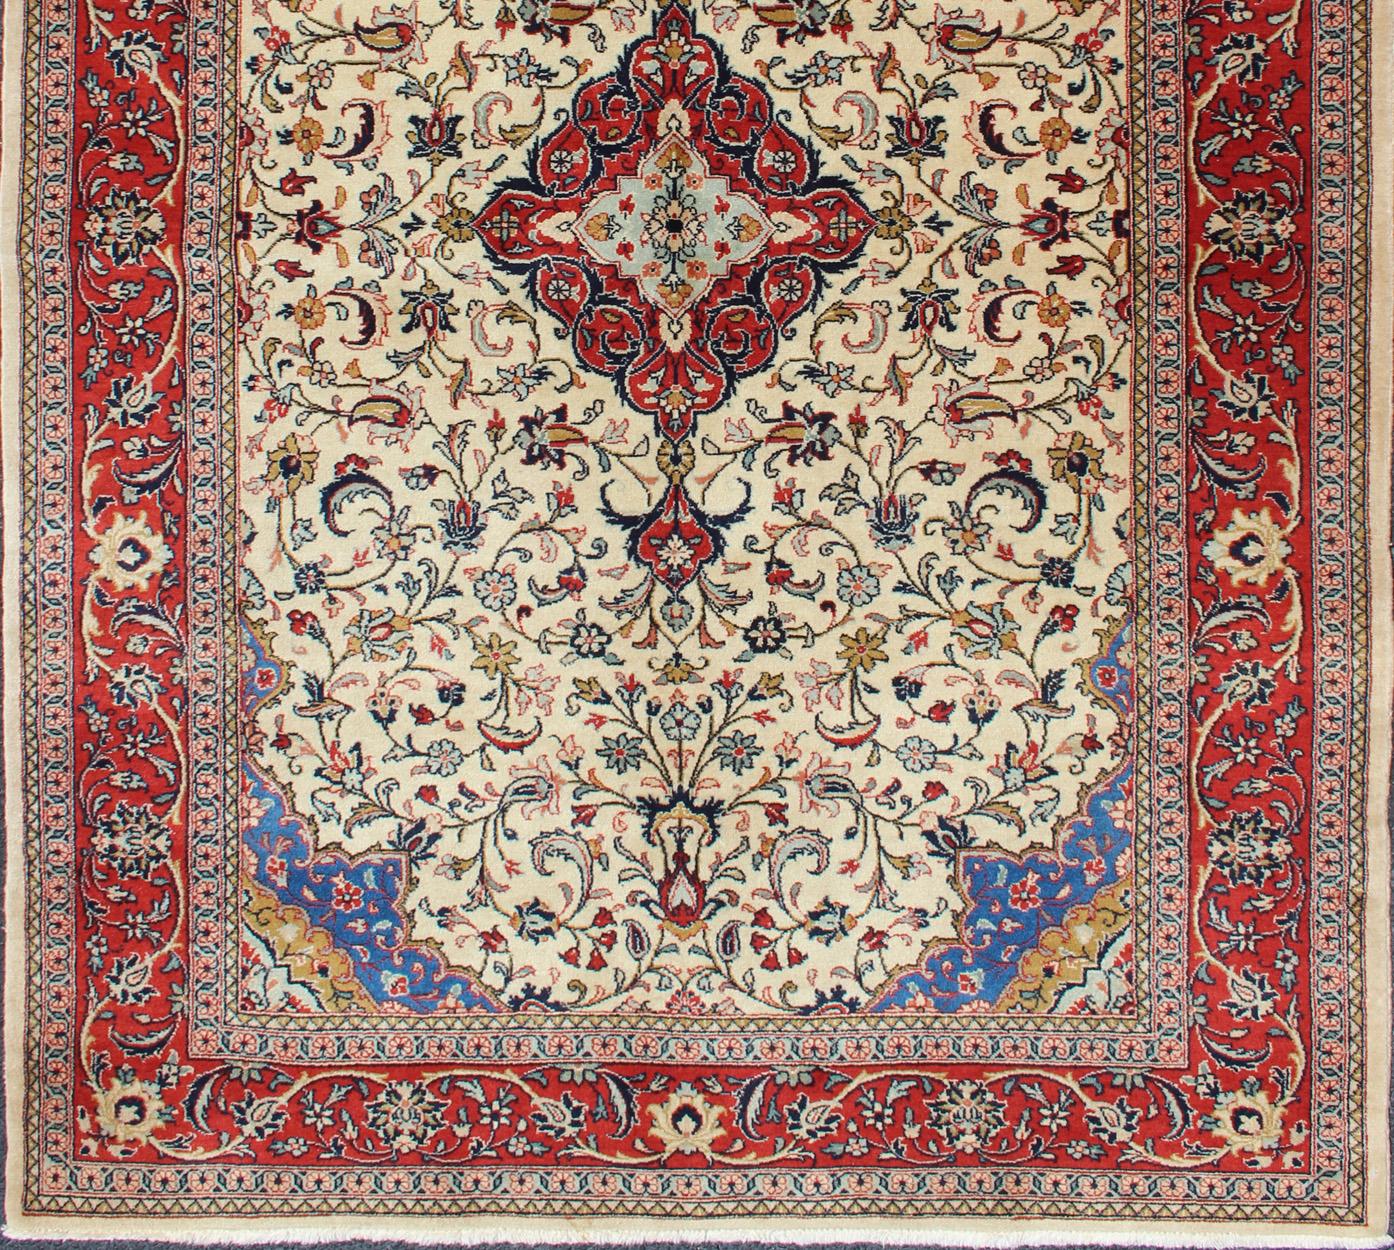 Hand-Knotted Vintage Persian Tabriz Rug with Floral Design in Cream, blue and Red